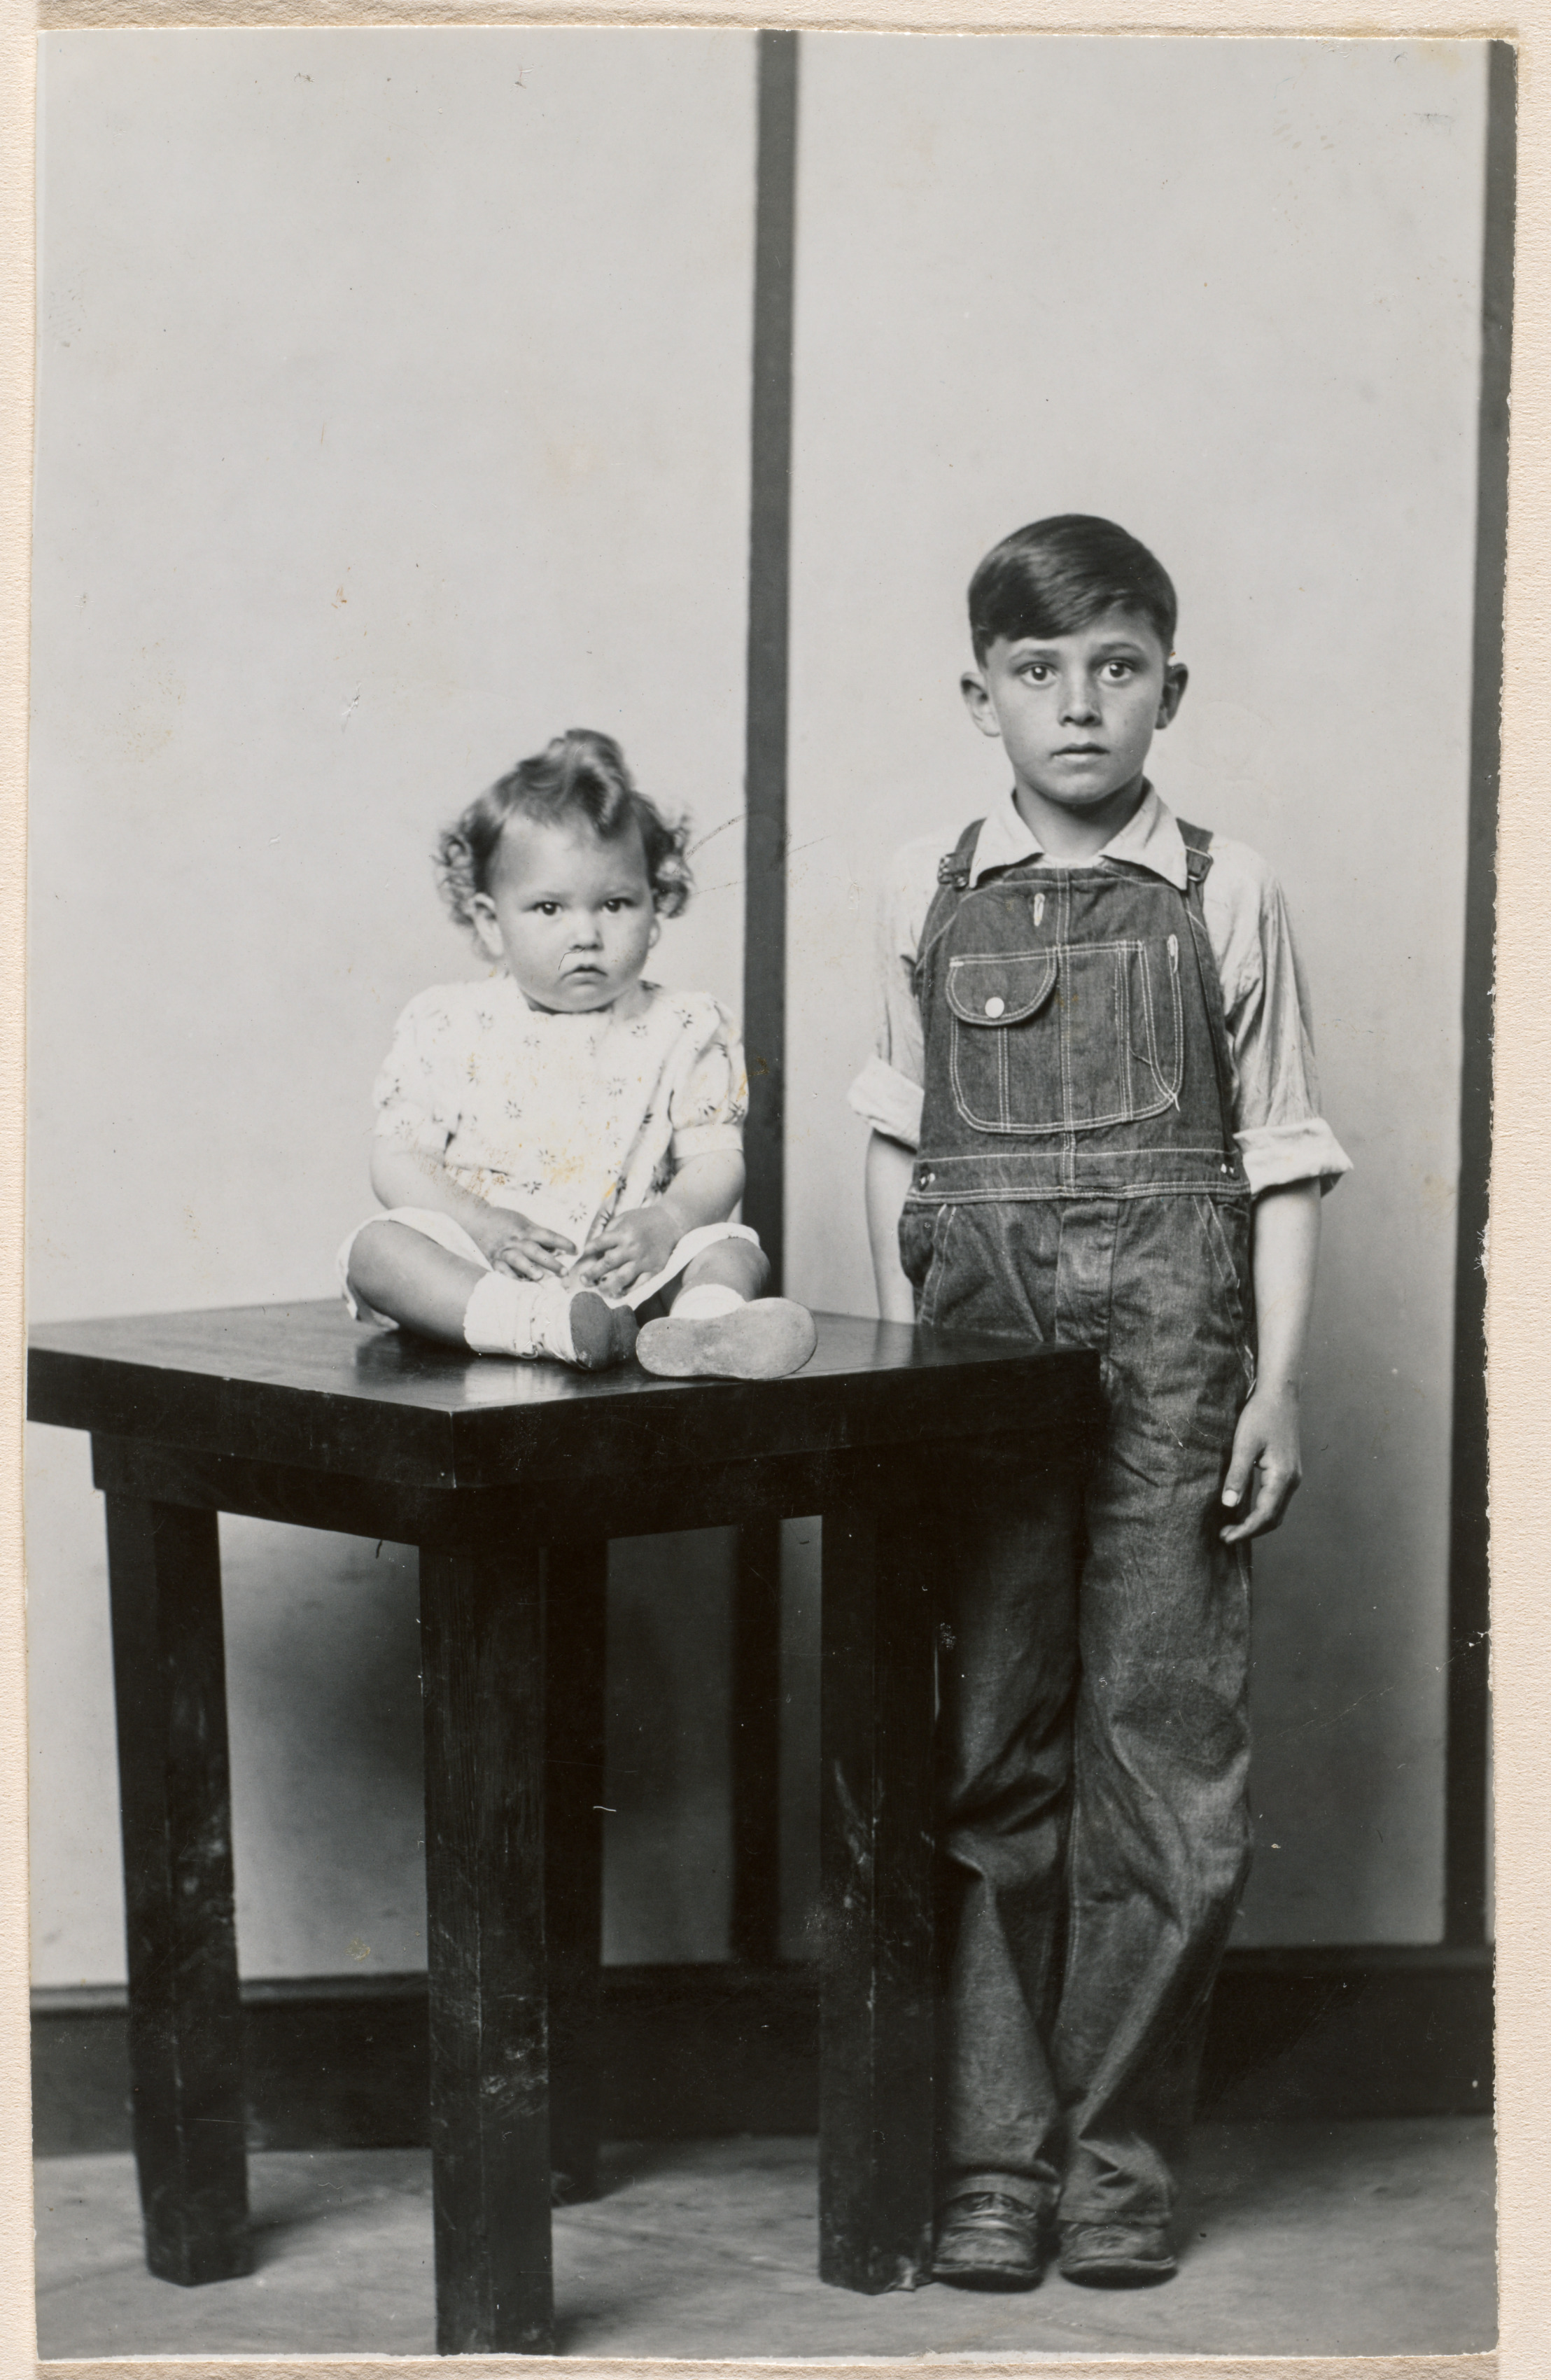 Standing boy in overalls, infant girl seated on table, striped background